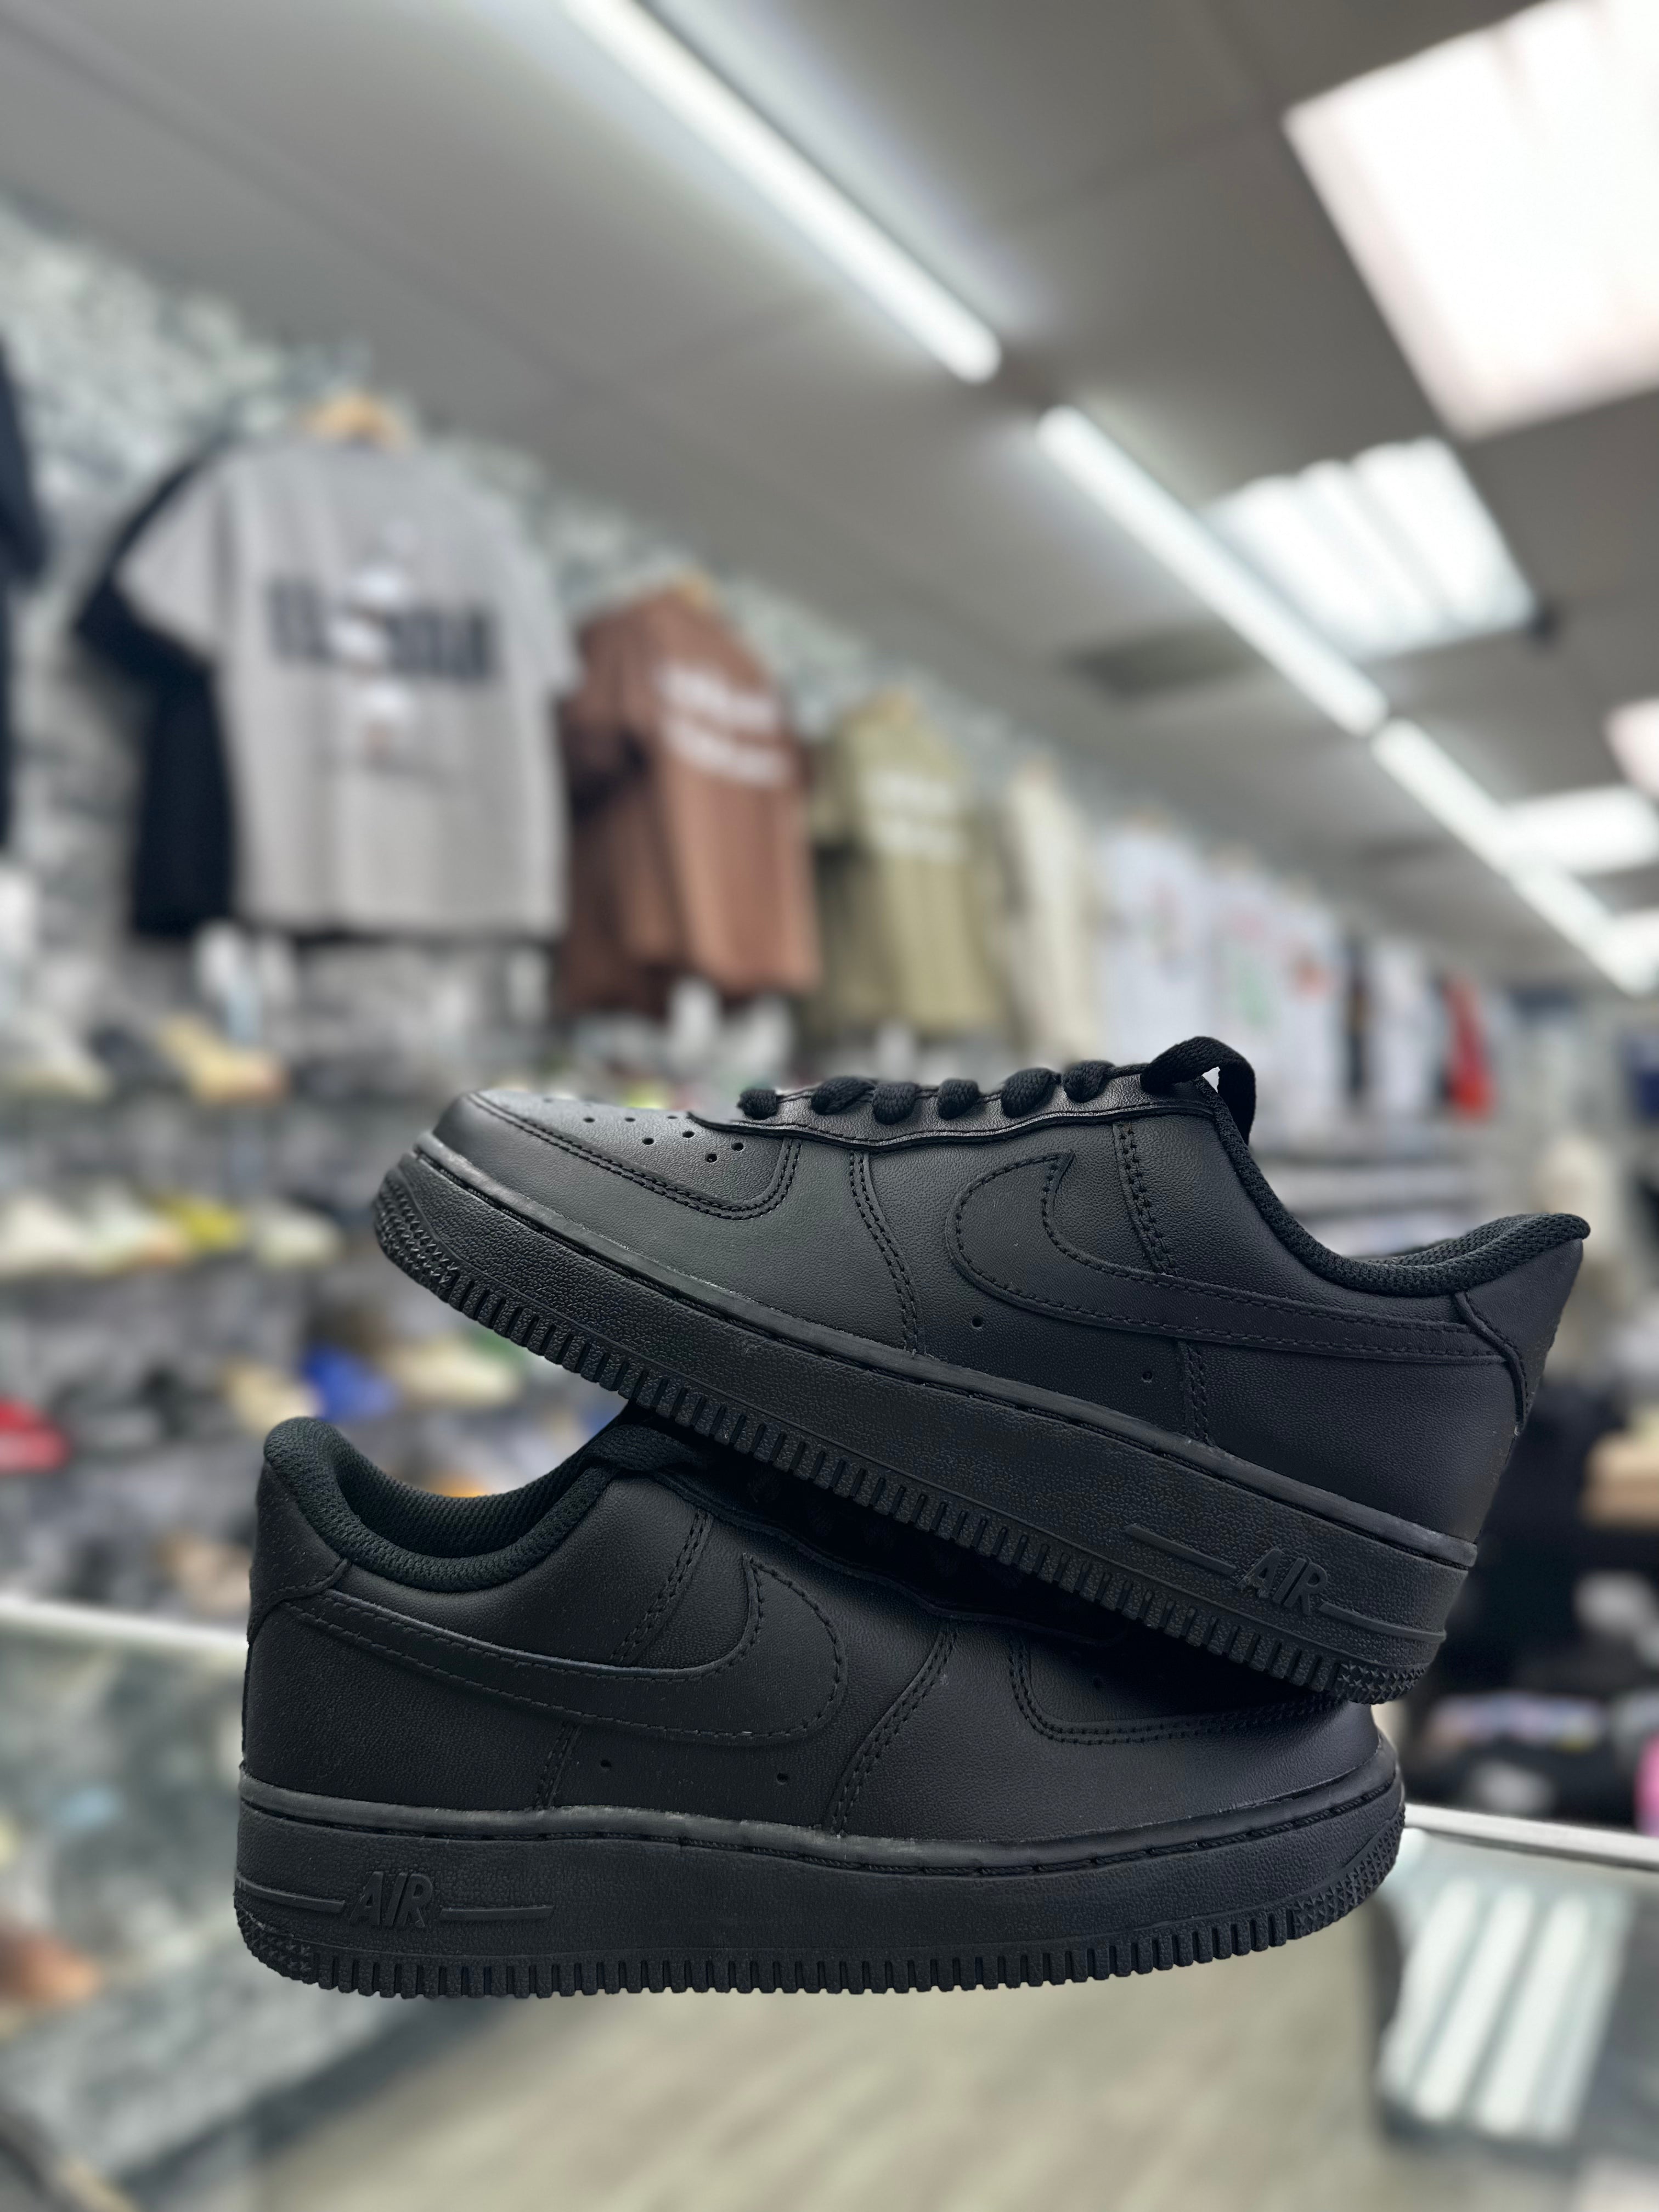 Nike Air Force 1 “All Black” (Gnikes) (GS)